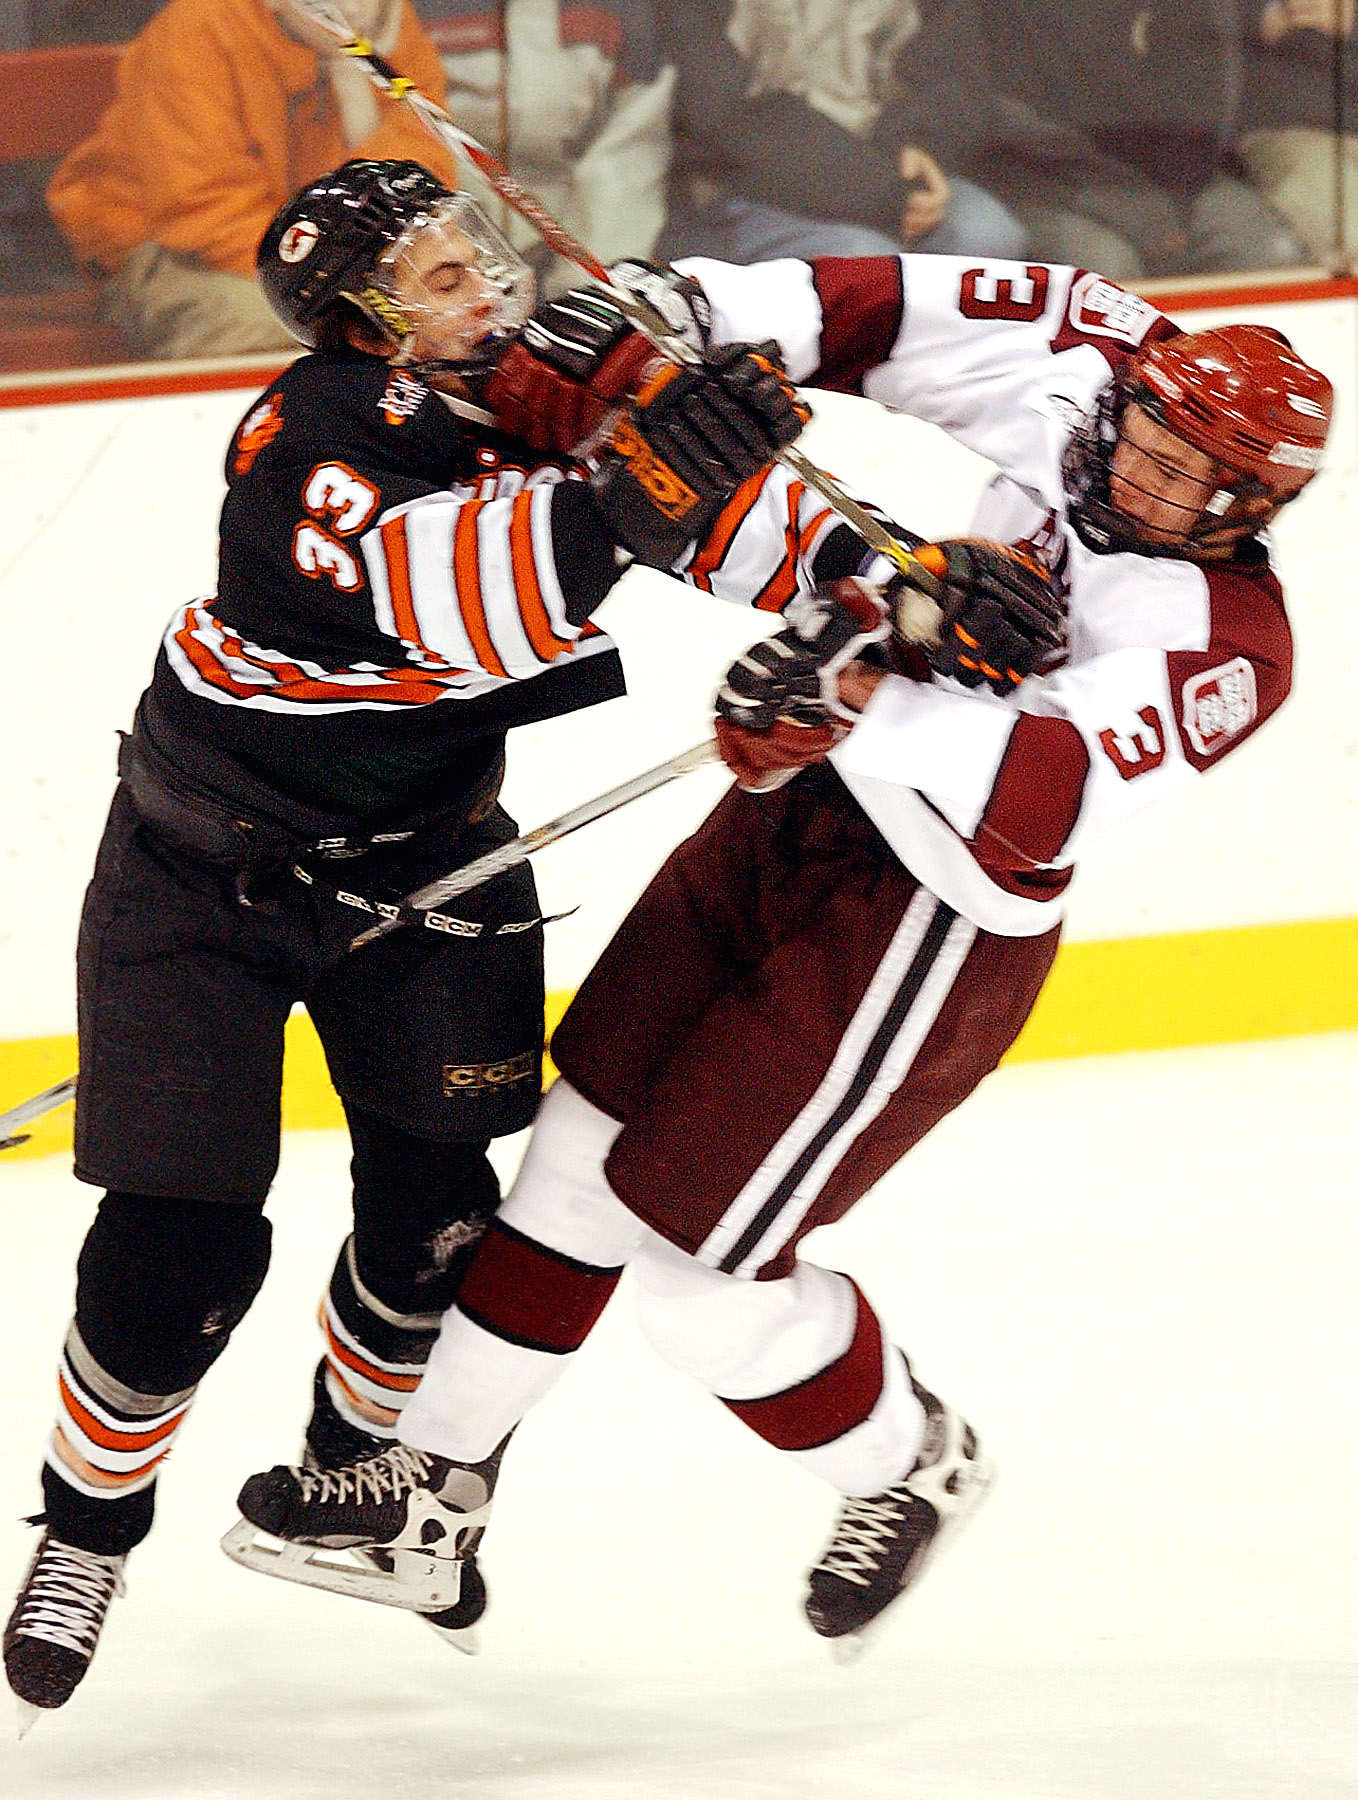 (01/11/03-Brighton, MA)HARVARD V PRINCETON— Harvard’sPeter Hafner (right) and Princeton’s George Parros collide during the first period at the Bright Hockey Center on Saturday afternoon. (011103harvardkw-Staff PHoto by Kevin Wisniewski. Saved in Pho